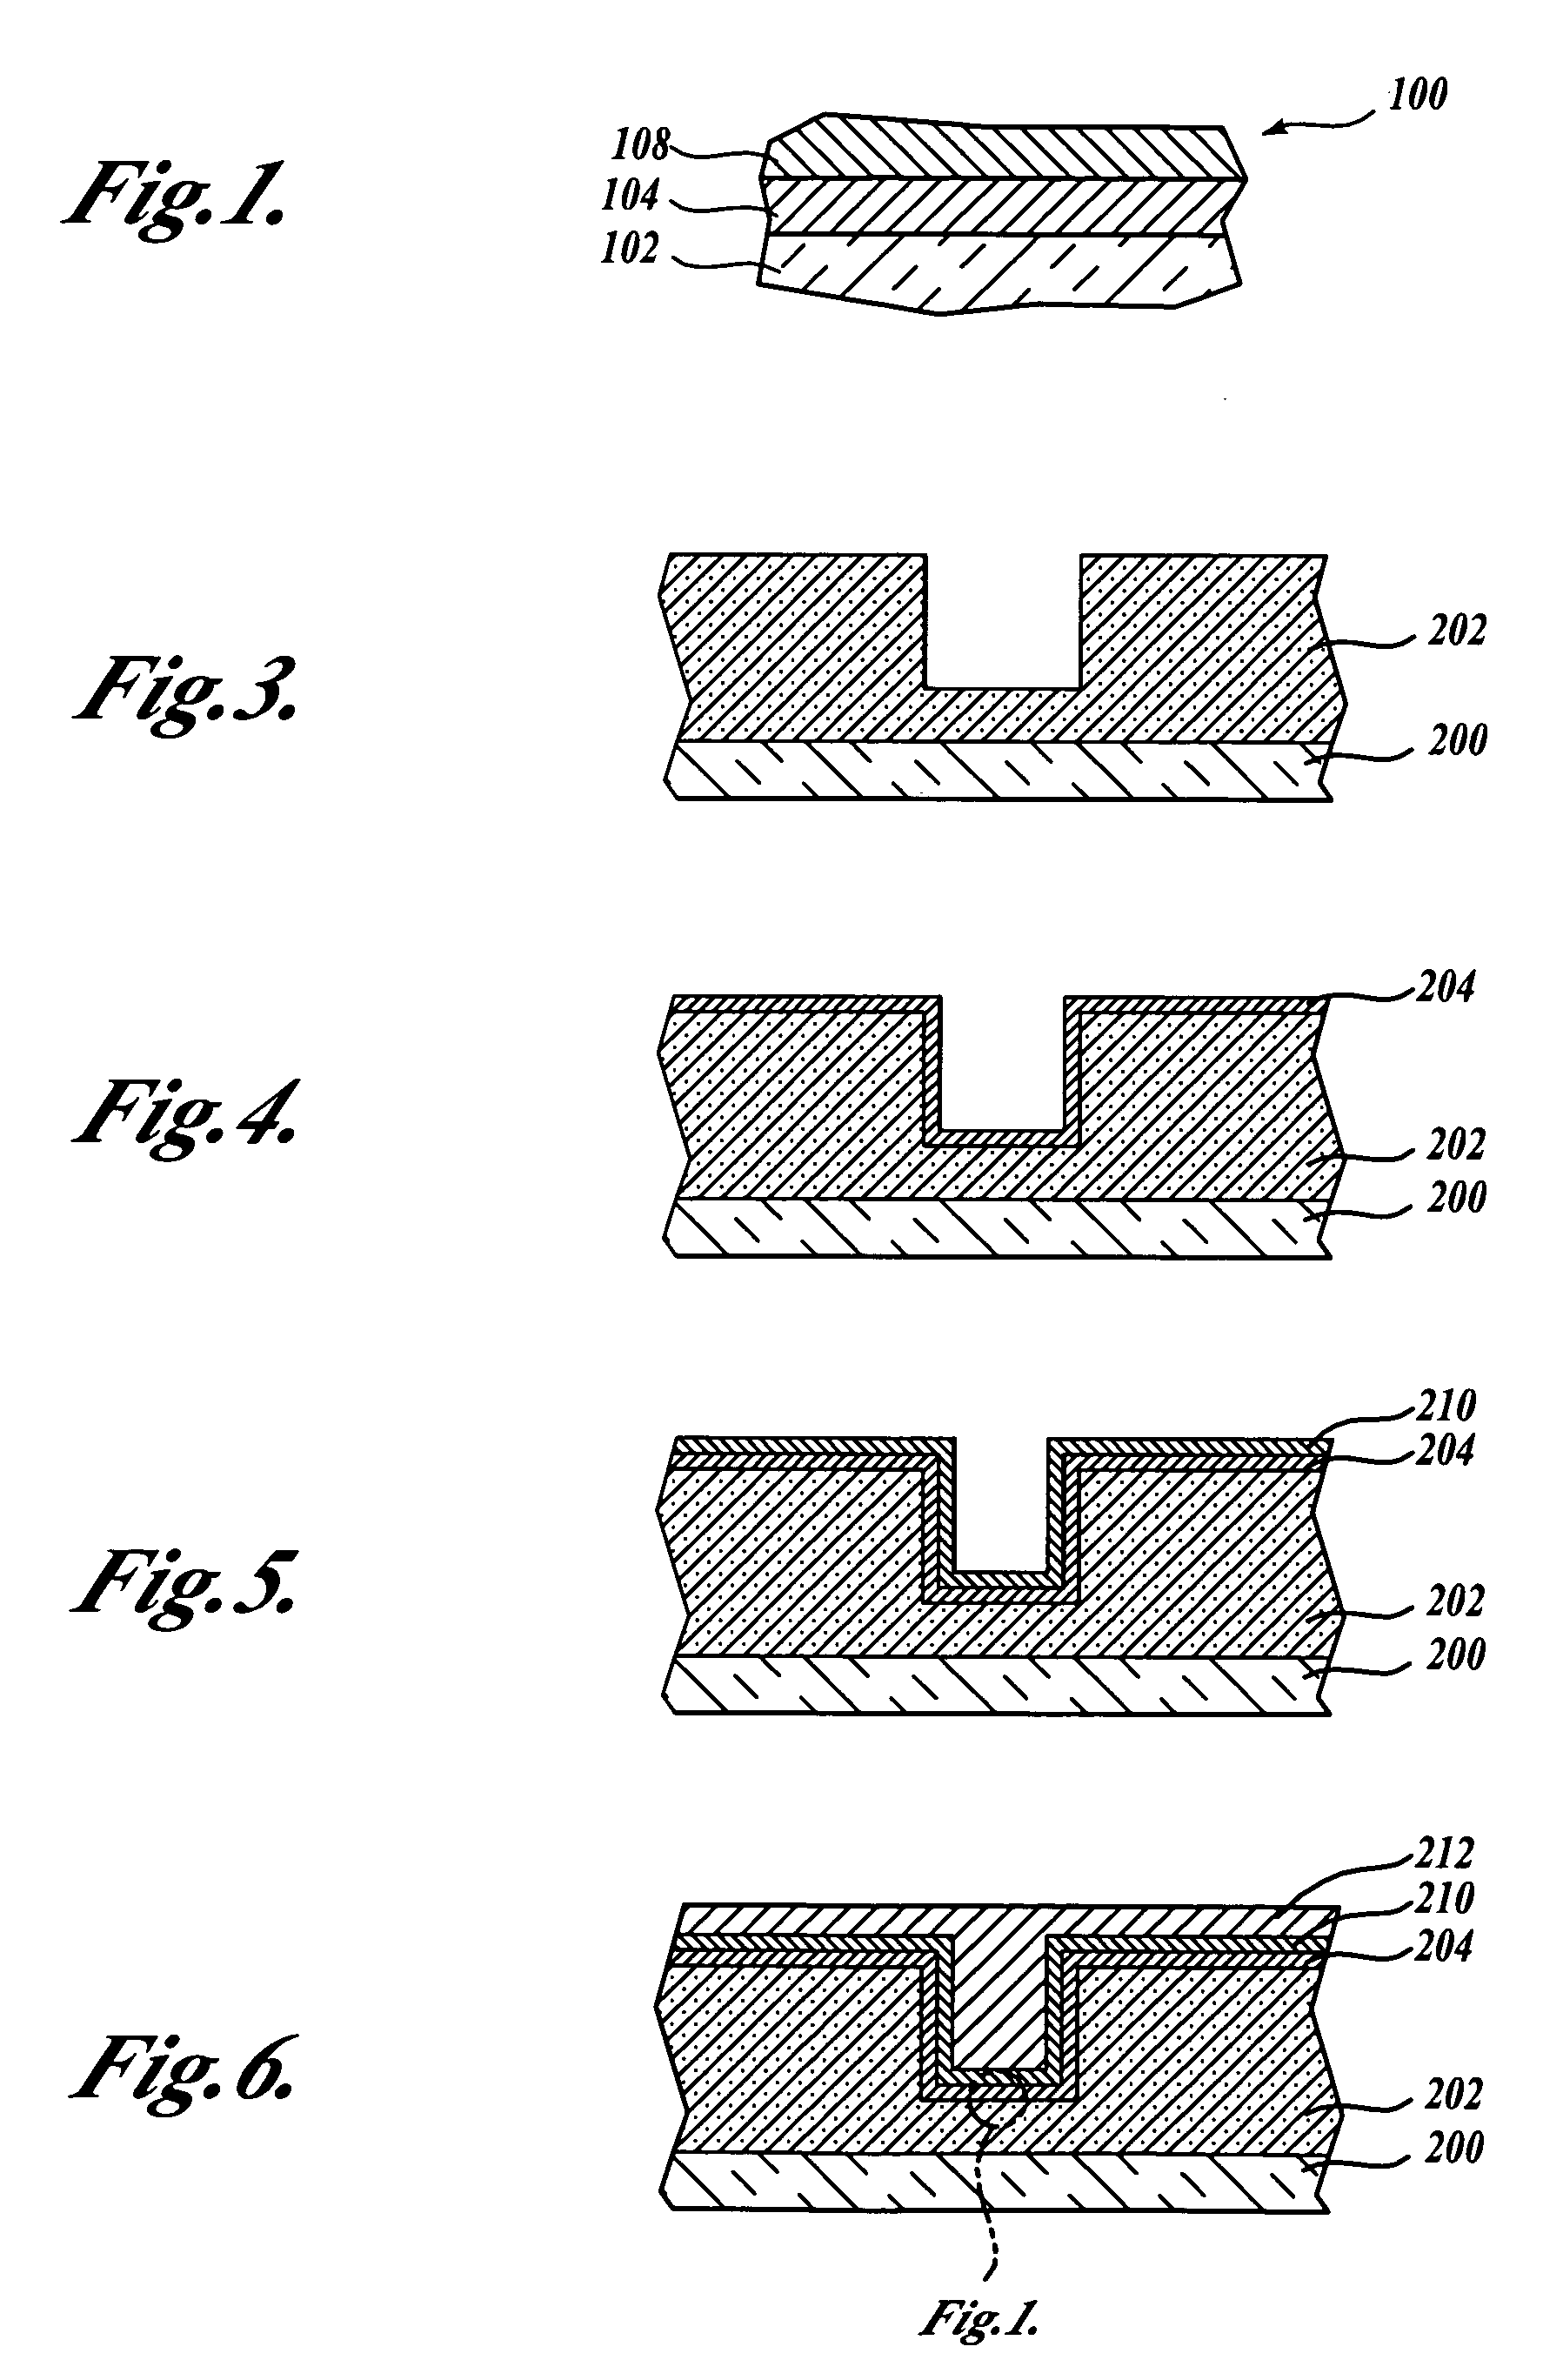 Method for applying metal features onto metallized layers using electrochemical deposition